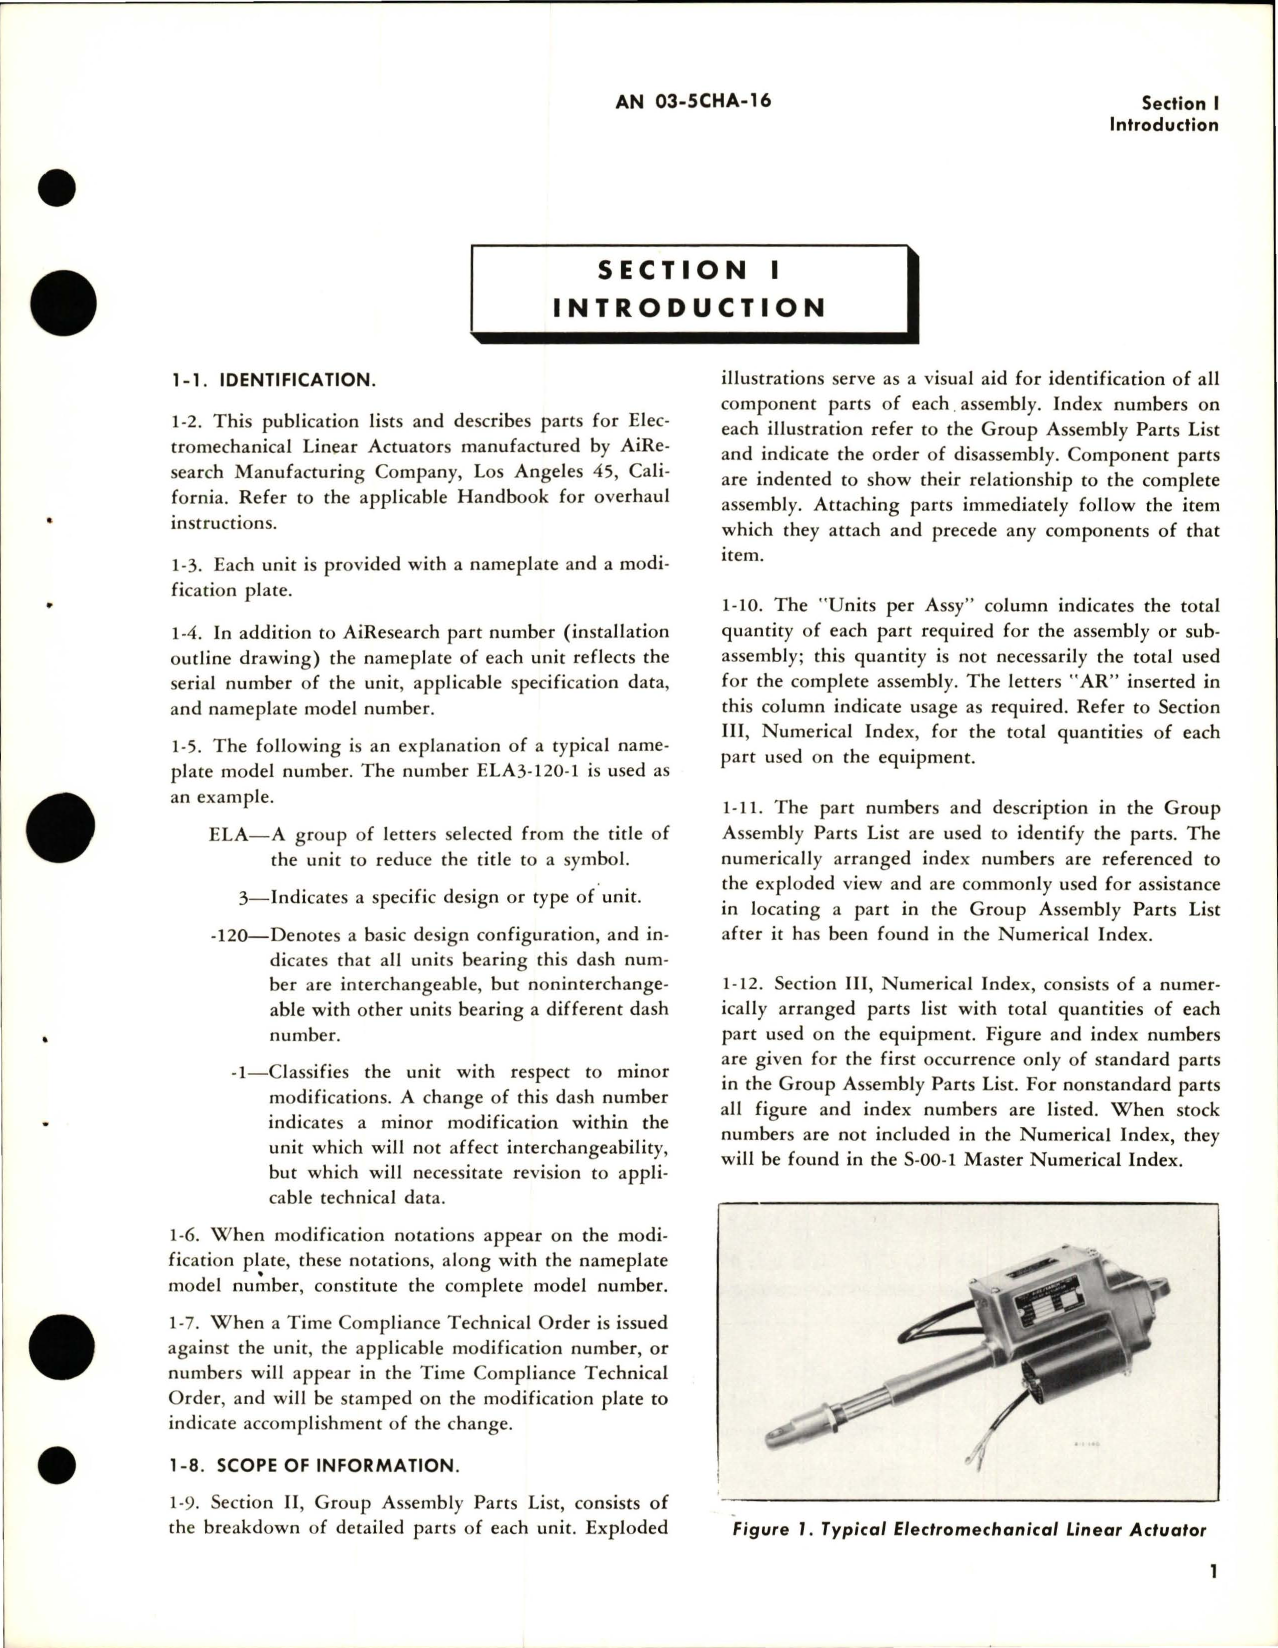 Sample page 5 from AirCorps Library document: Illustrated Parts Breakdown for Electromechanical Linear Actuators 